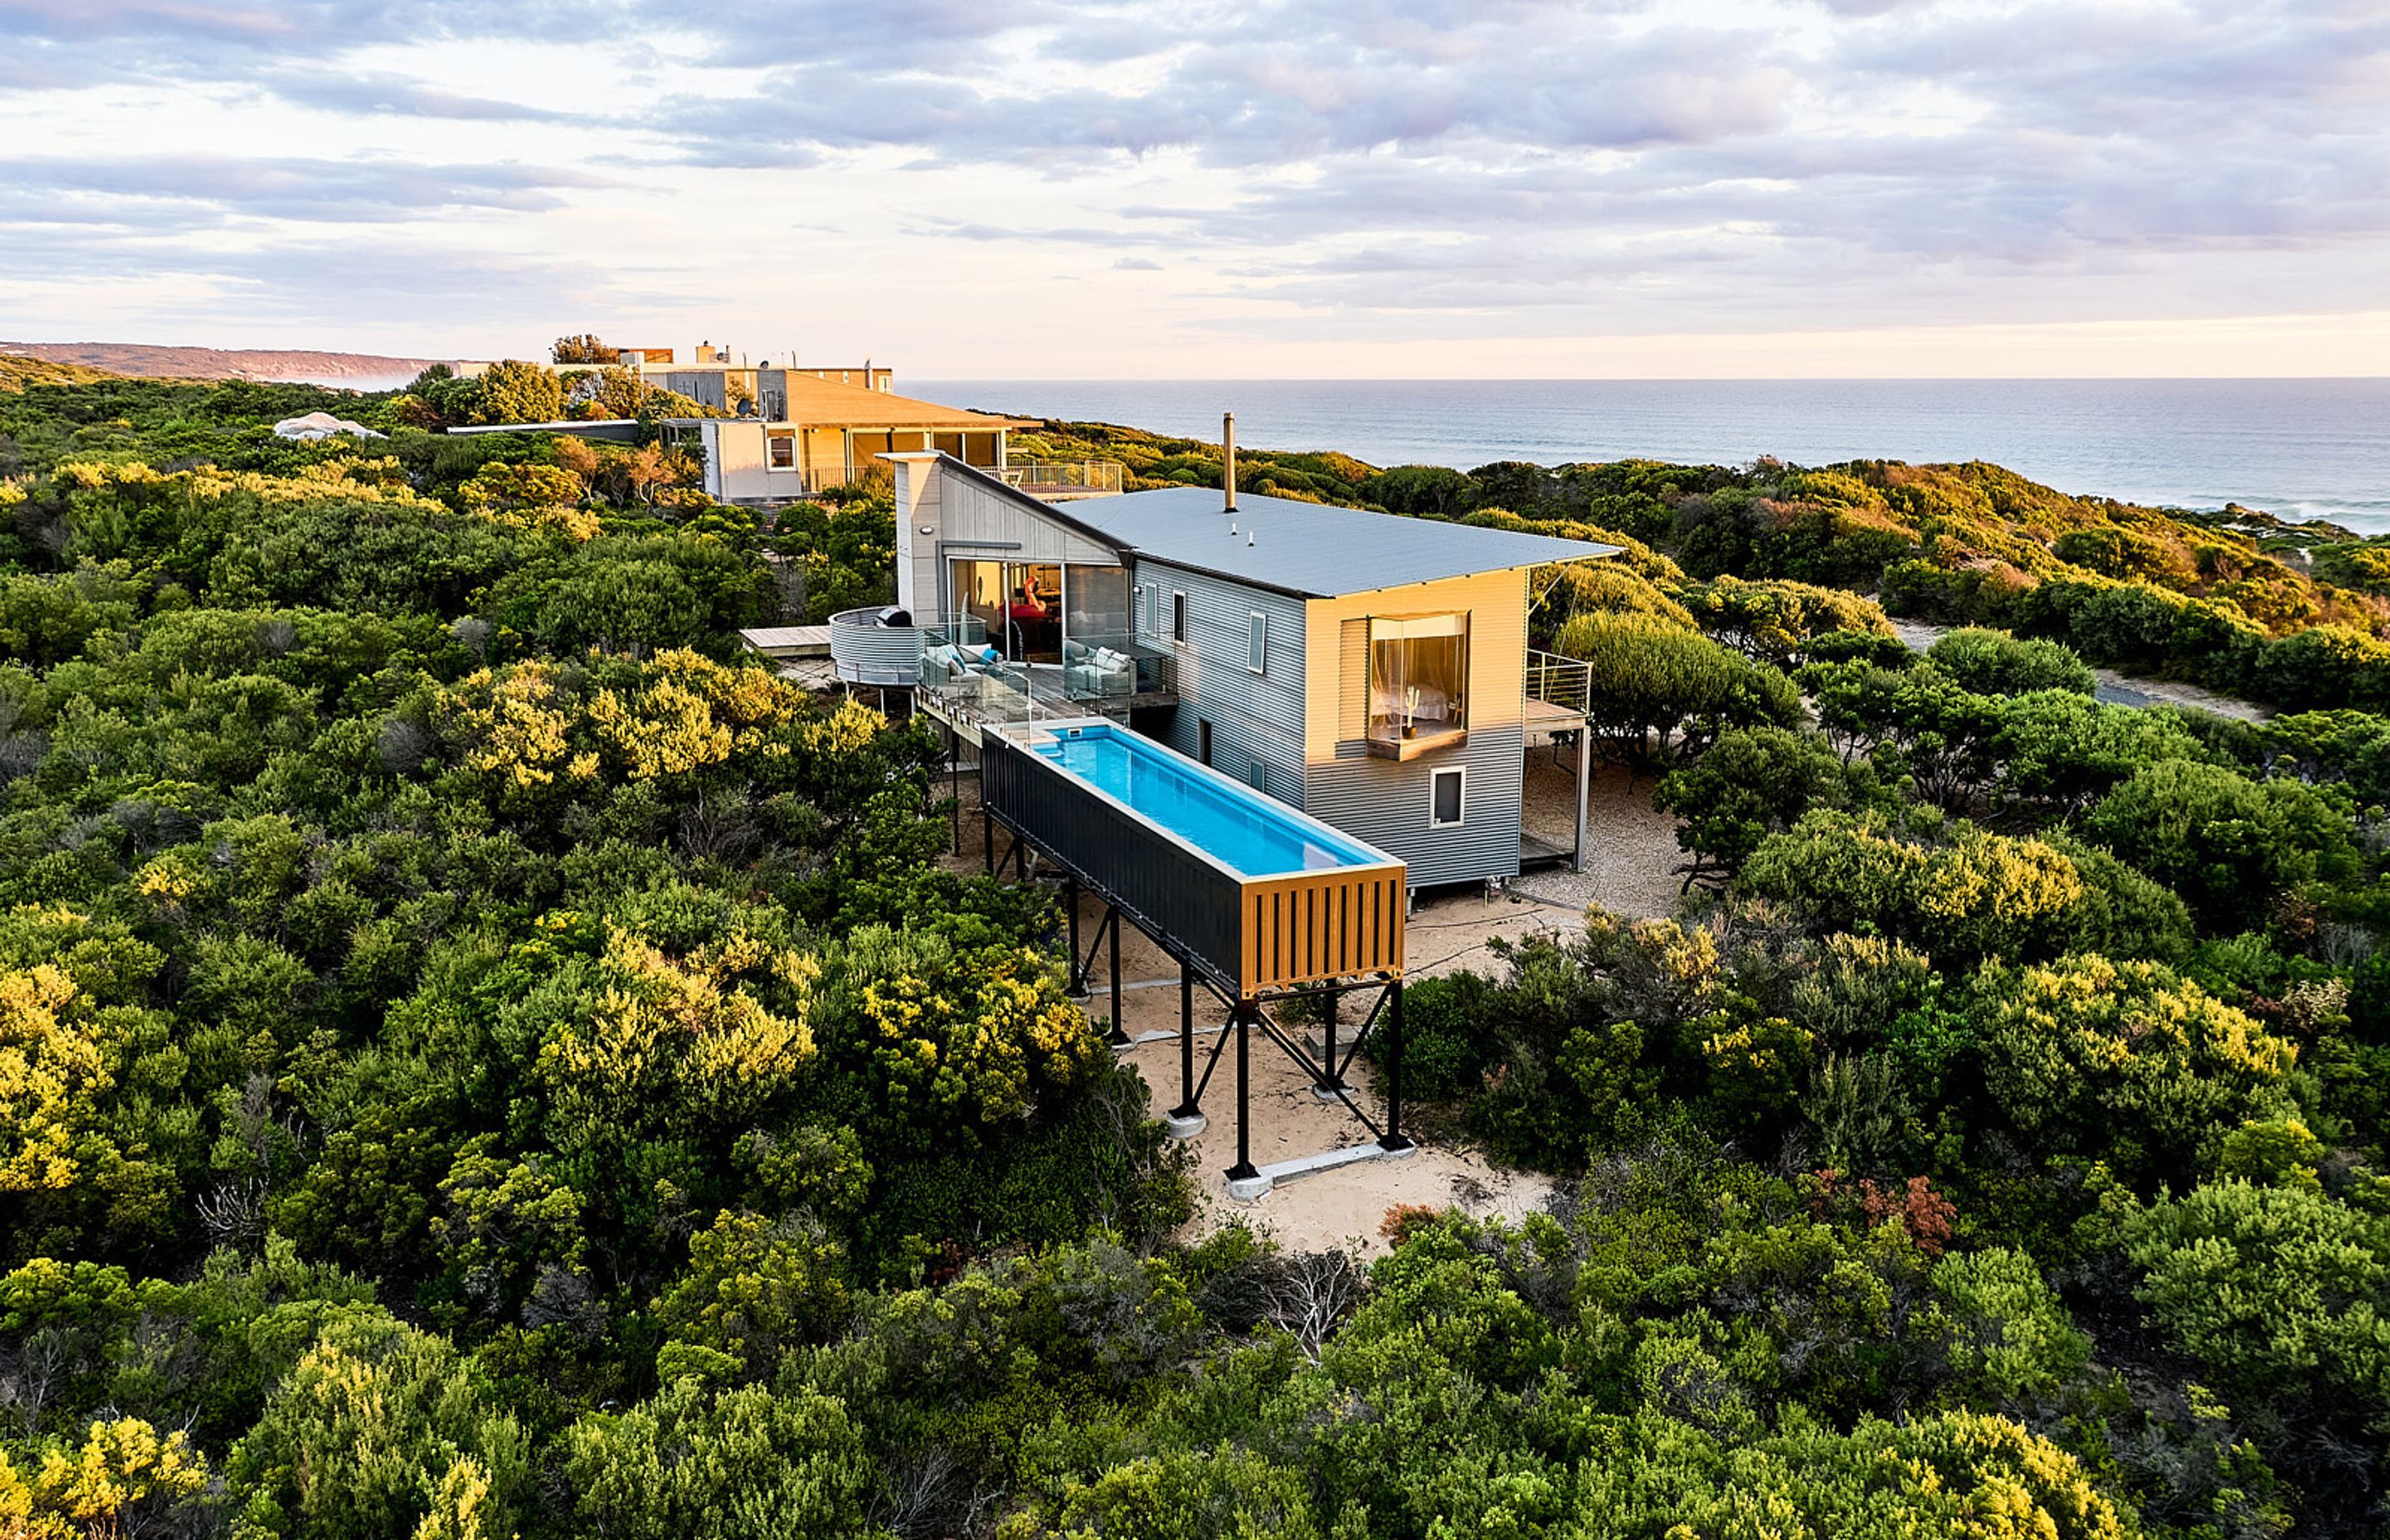 St Andrews Beach. Product by Shipping Container Pools | Photography by Chris McConville